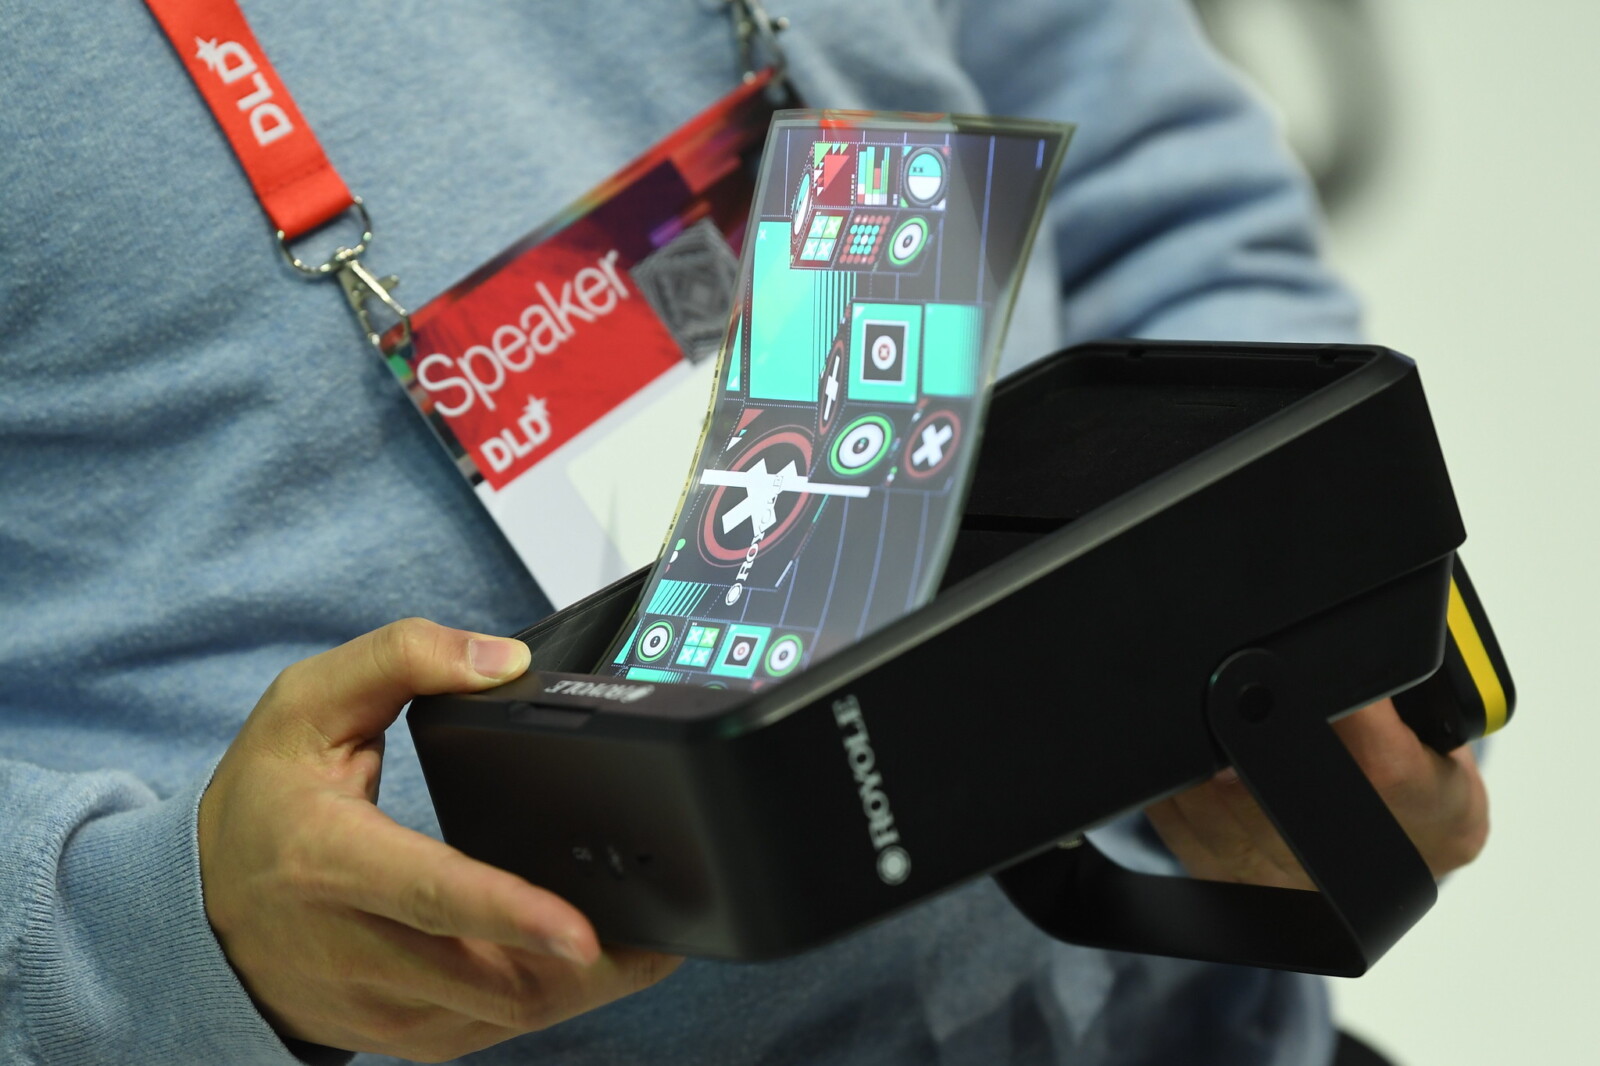 Bill Liu (Royale Corp.) presents Royole's flexible display and flexible sensor at the DLD Munich Conference